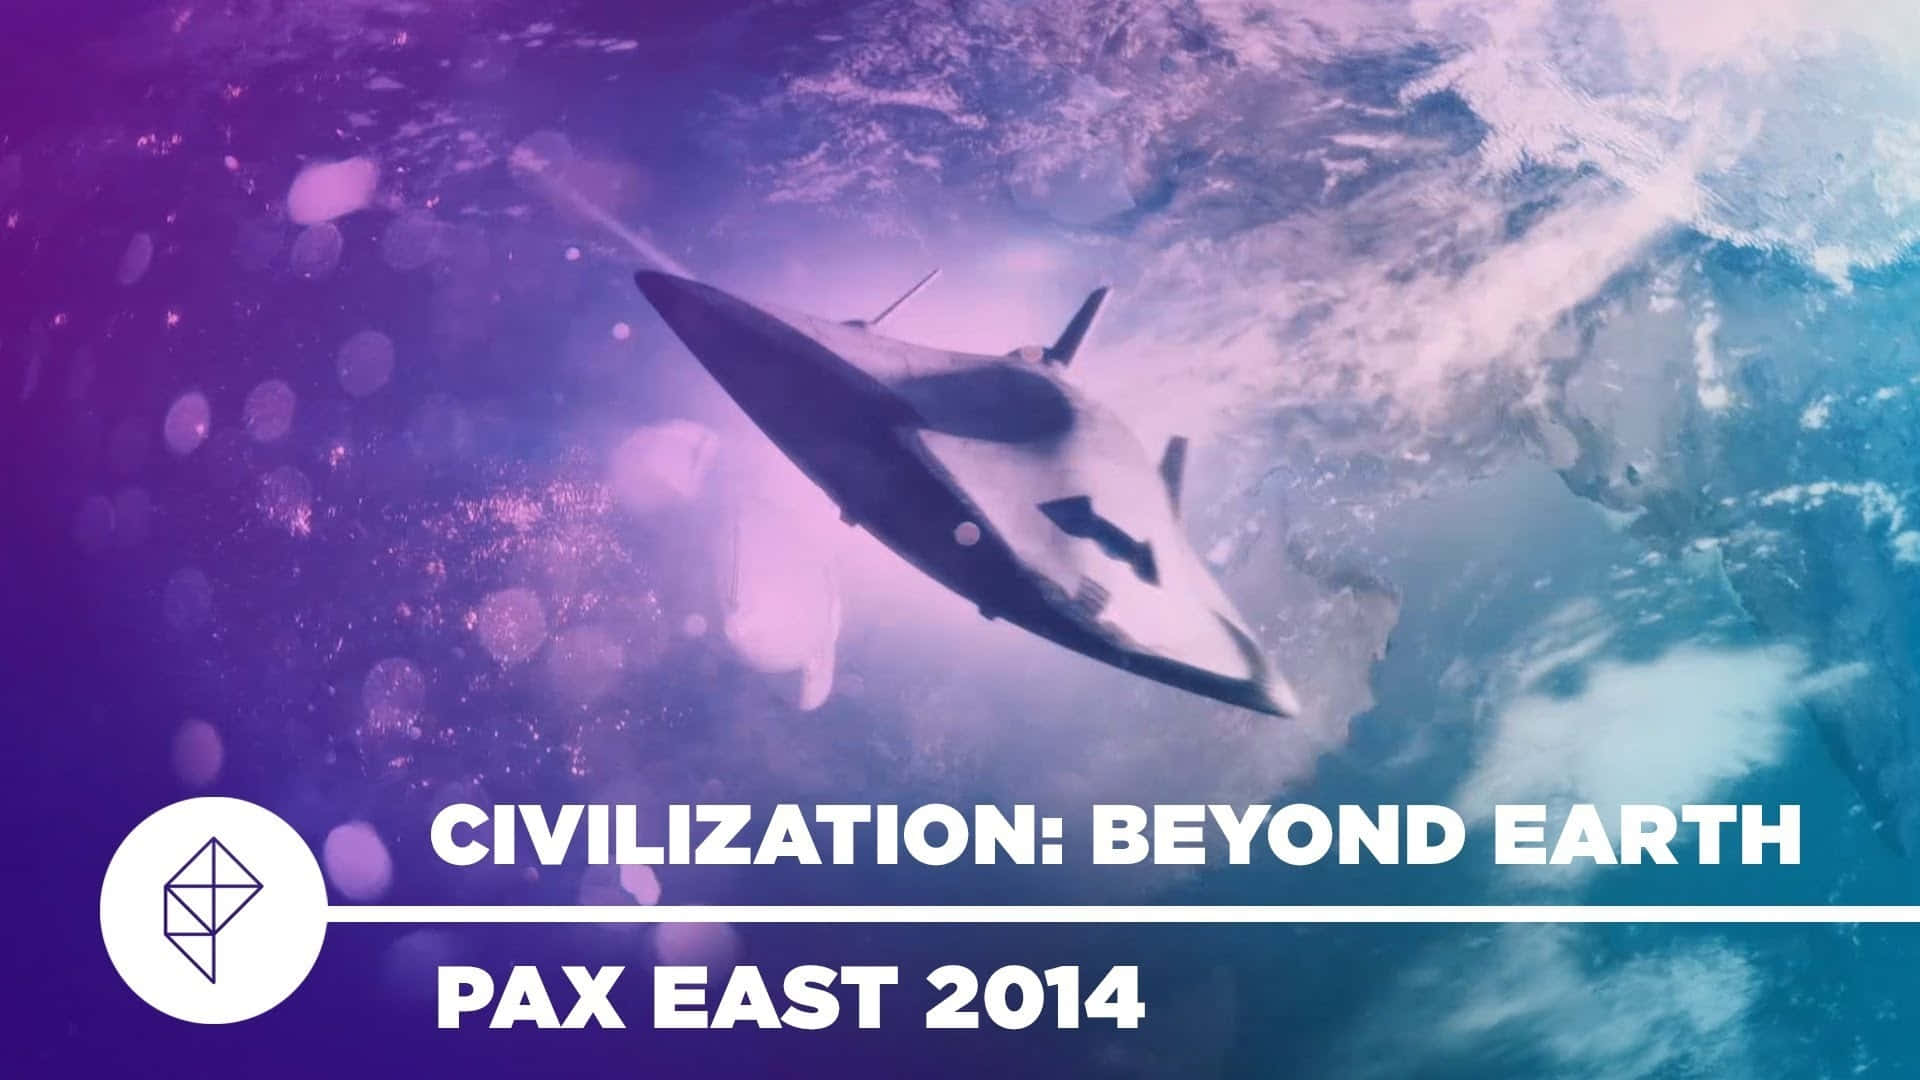 Pax East 2014 Best Civilization Beyond Earth Background